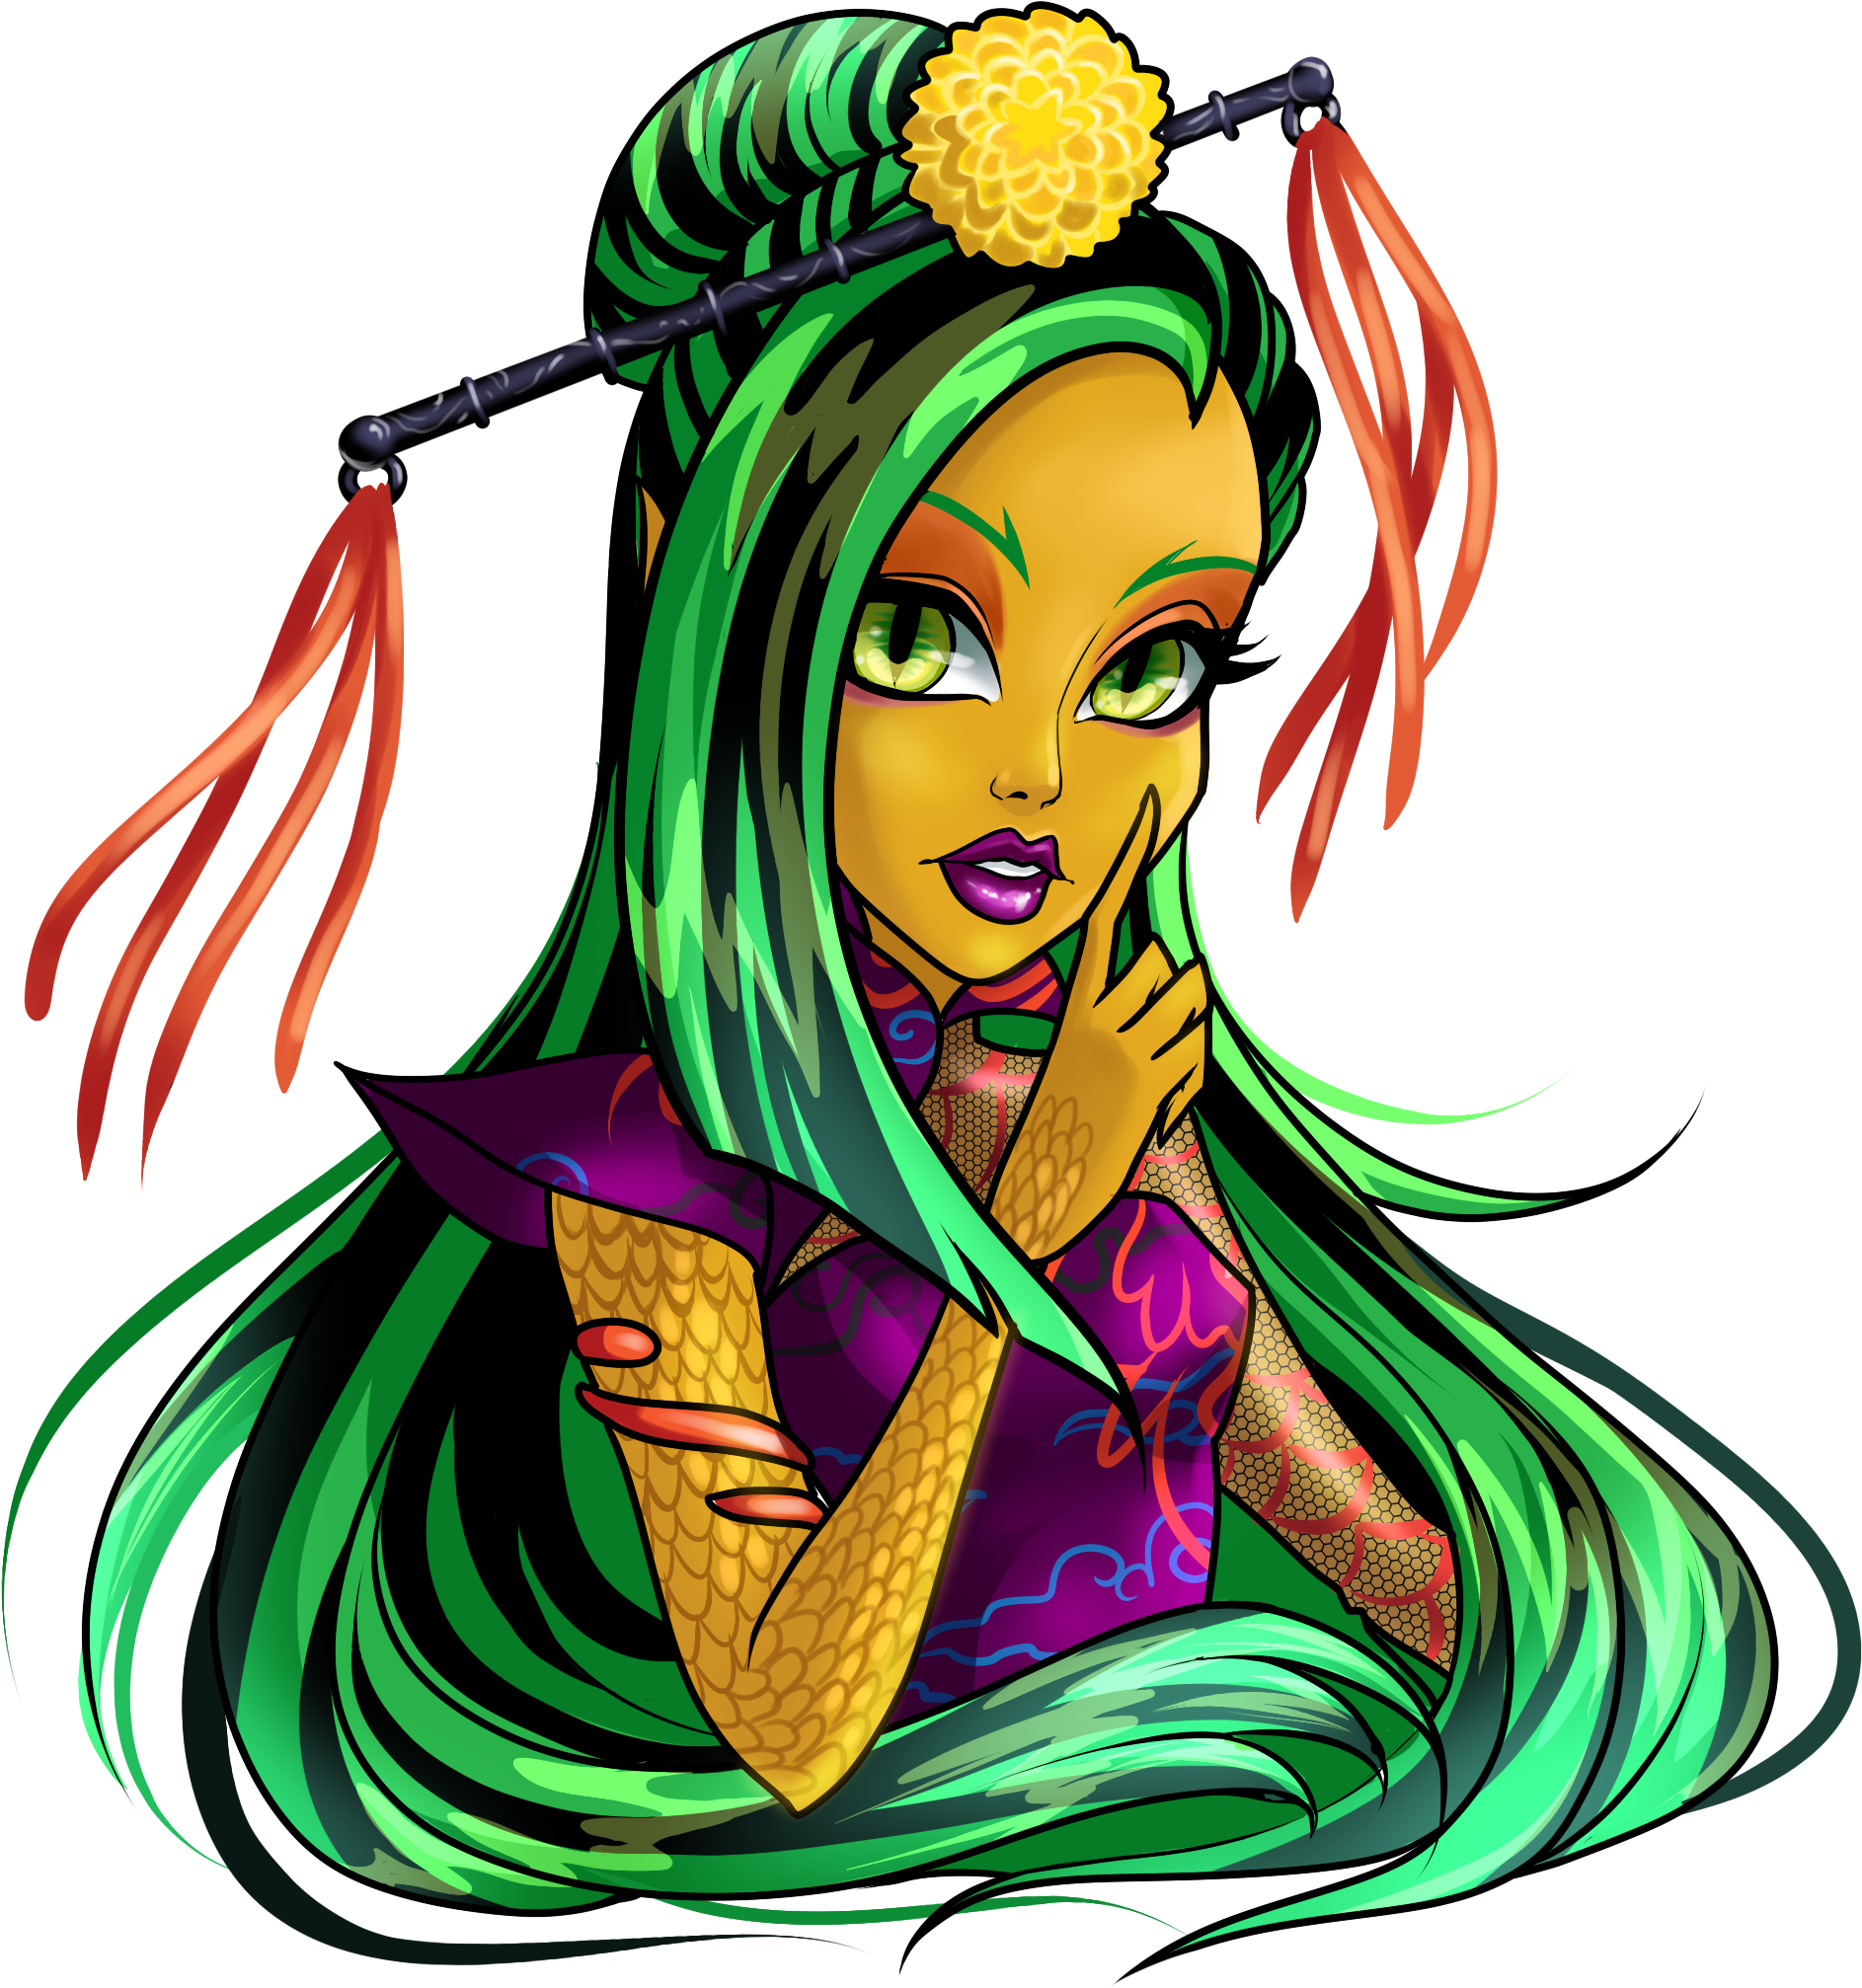 A Cartoon Of A Woman With Green Hair